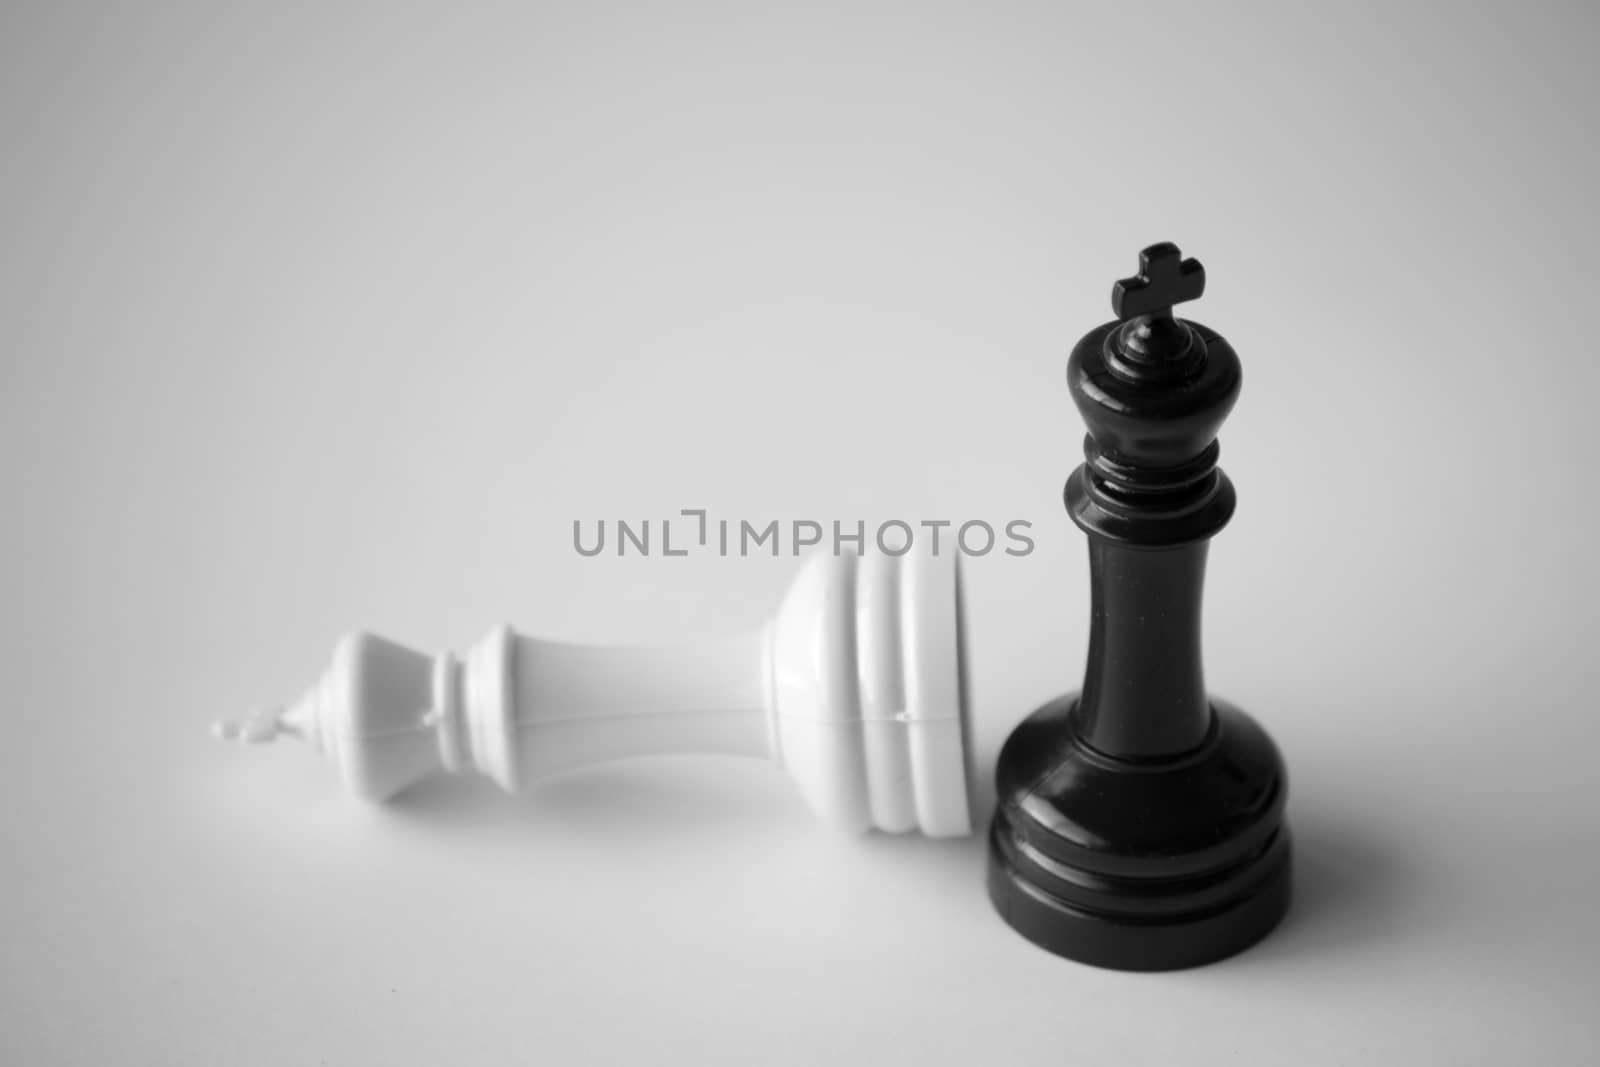 Checkmate in black and white by rmbarricarte